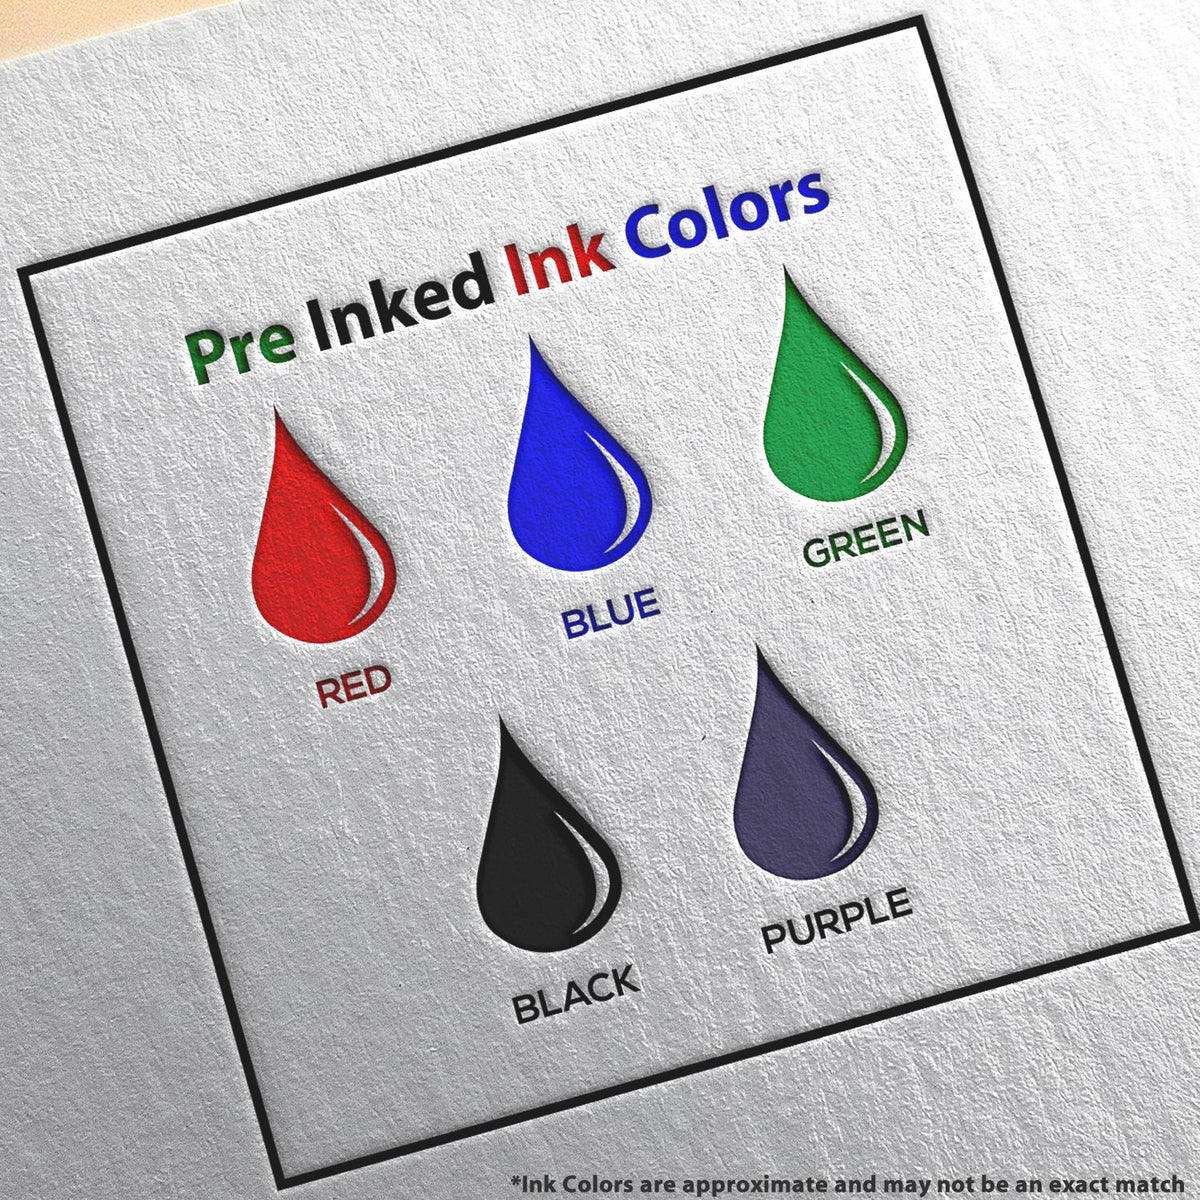 A picture showing the different ink colors or hues available for the Slim Pre-Inked Guam Professional Geologist Seal Stamp